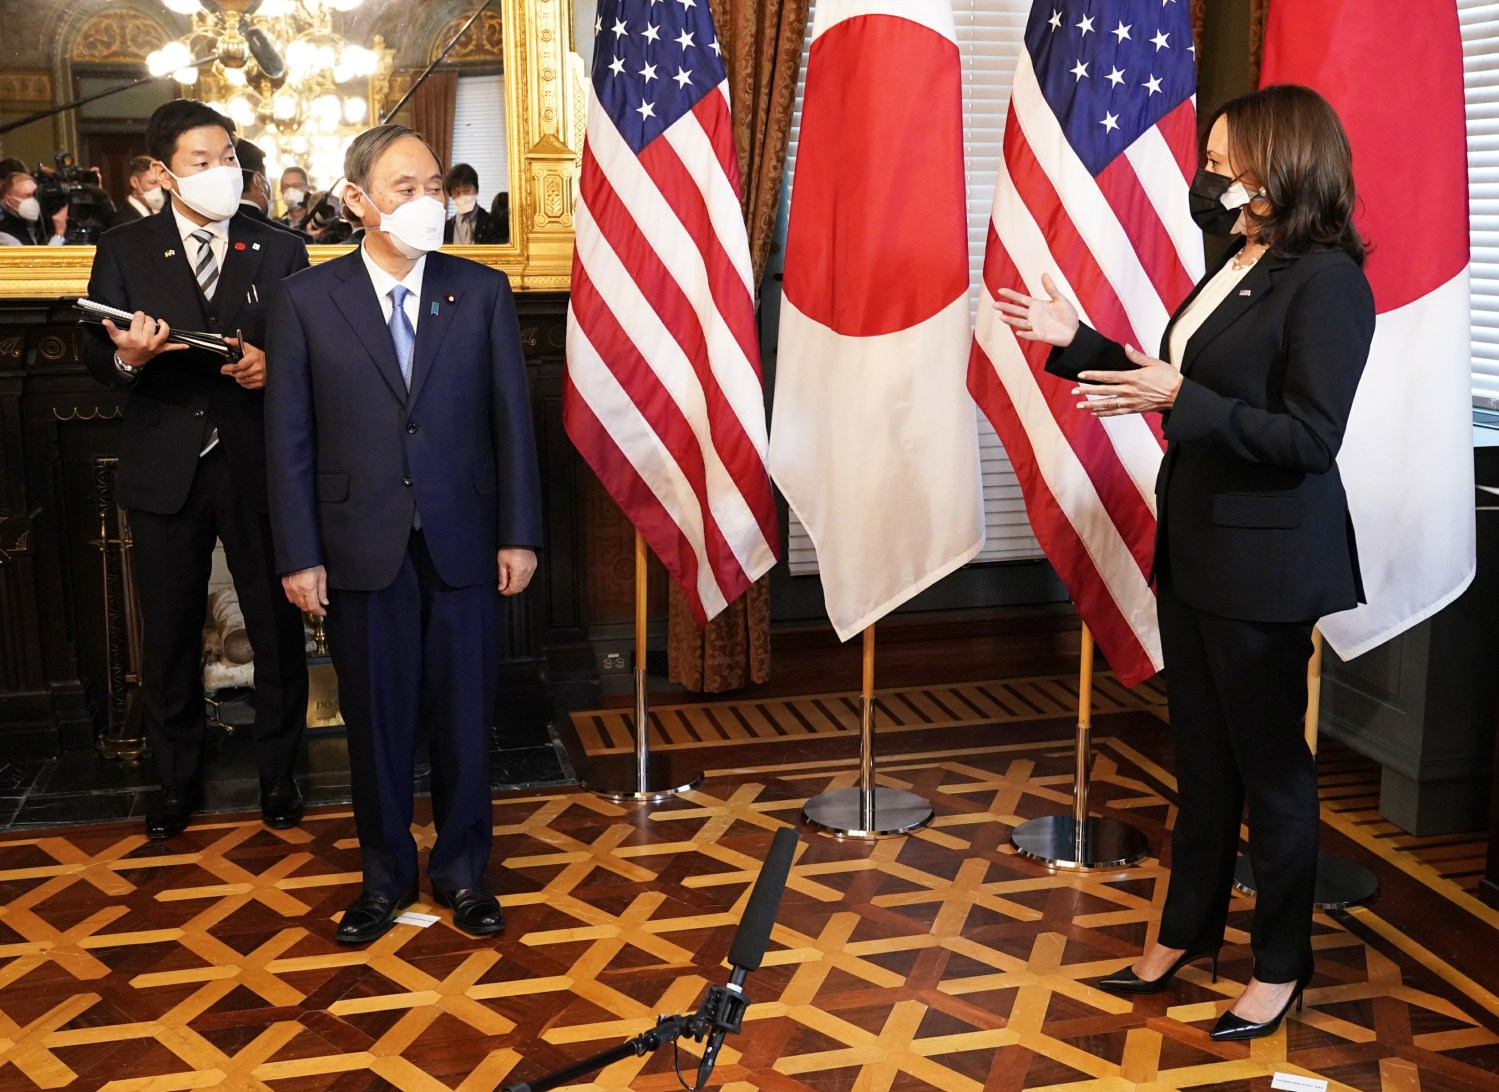 United States Vice President Kamala Harris greets Prime Minister Yoshihide Suga of Japan, before holding a meeting at The White House.Featuring: Yoshihide Suga, Kamala HarrisWhere: Washington, District of Columbia, United StatesWhen: 16 Apr 2021Credit: Chris Kleponis/POOL via CNP/InStar/Cover Images